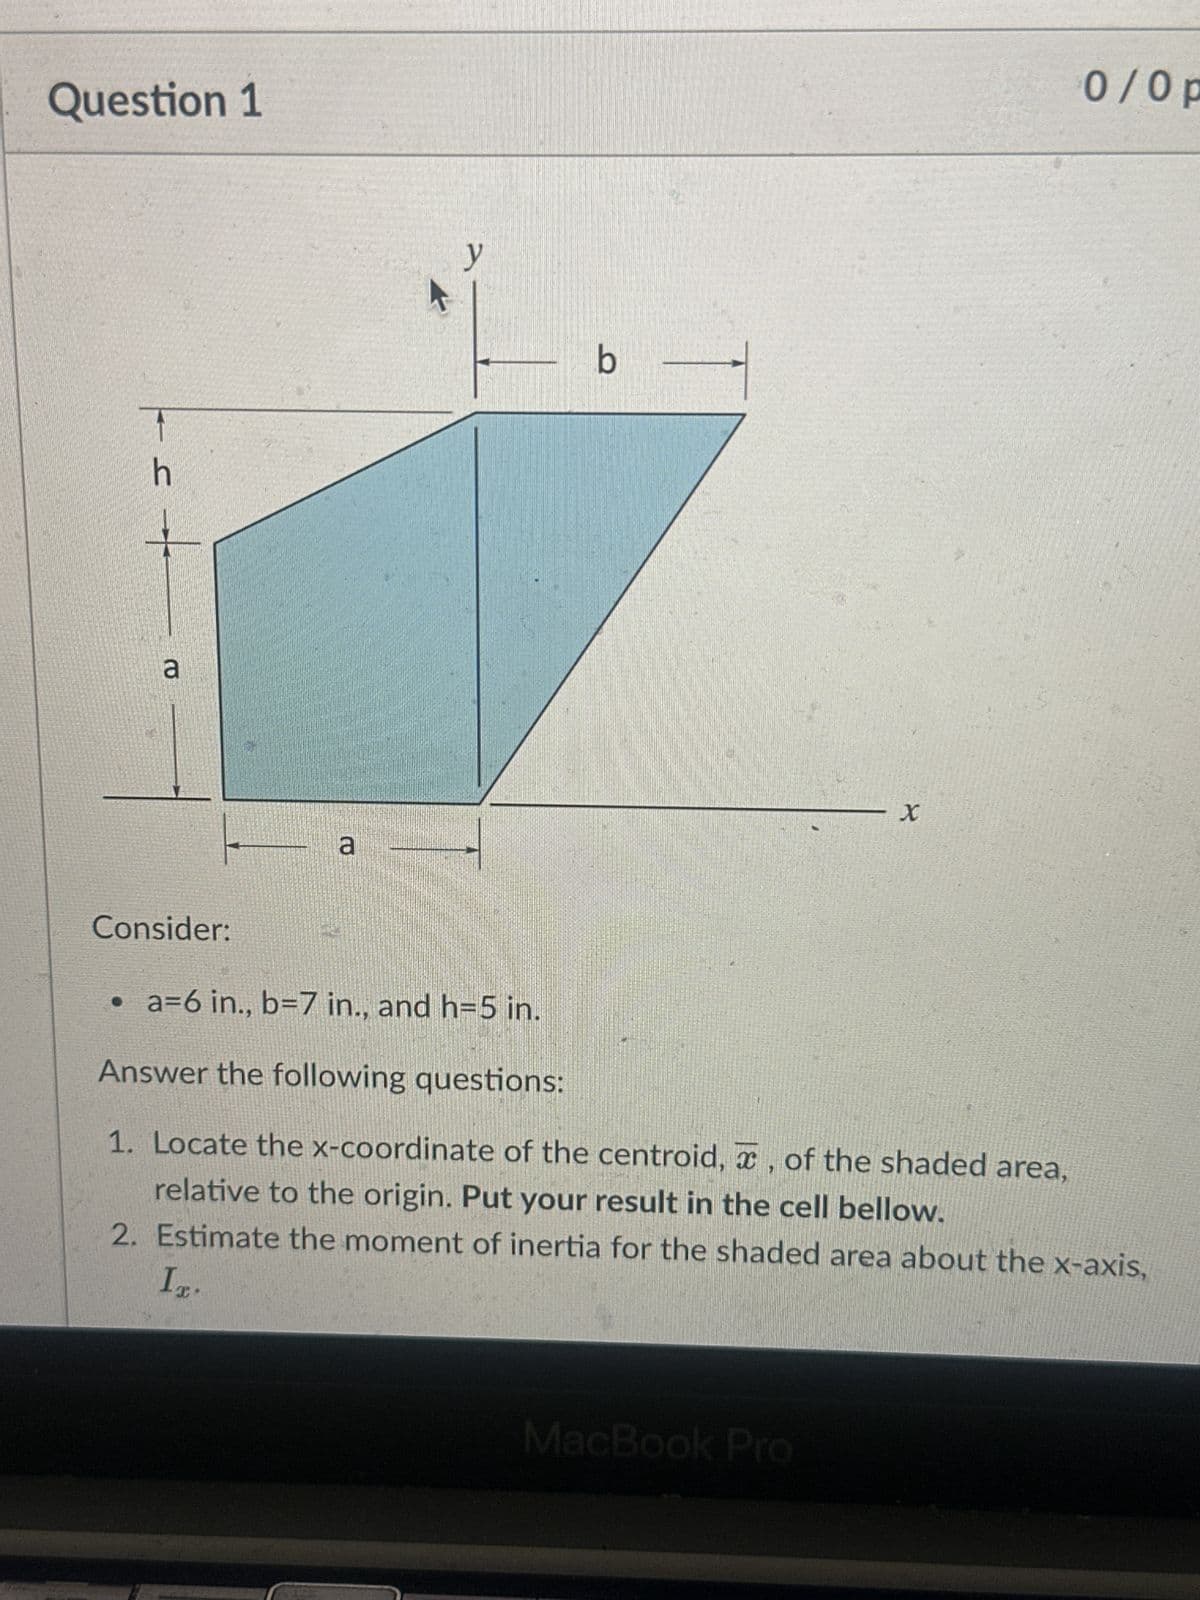 Question 1
h
+
a
a
y
b
X
0/0 p
Consider:
• a=6 in., b=7 in., and h=5 in.
Answer the following questions:
1. Locate the x-coordinate of the centroid, x, of the shaded area,
relative to the origin. Put your result in the cell bellow.
2. Estimate the moment of inertia for the shaded area about the x-axis,
MacBook Pro